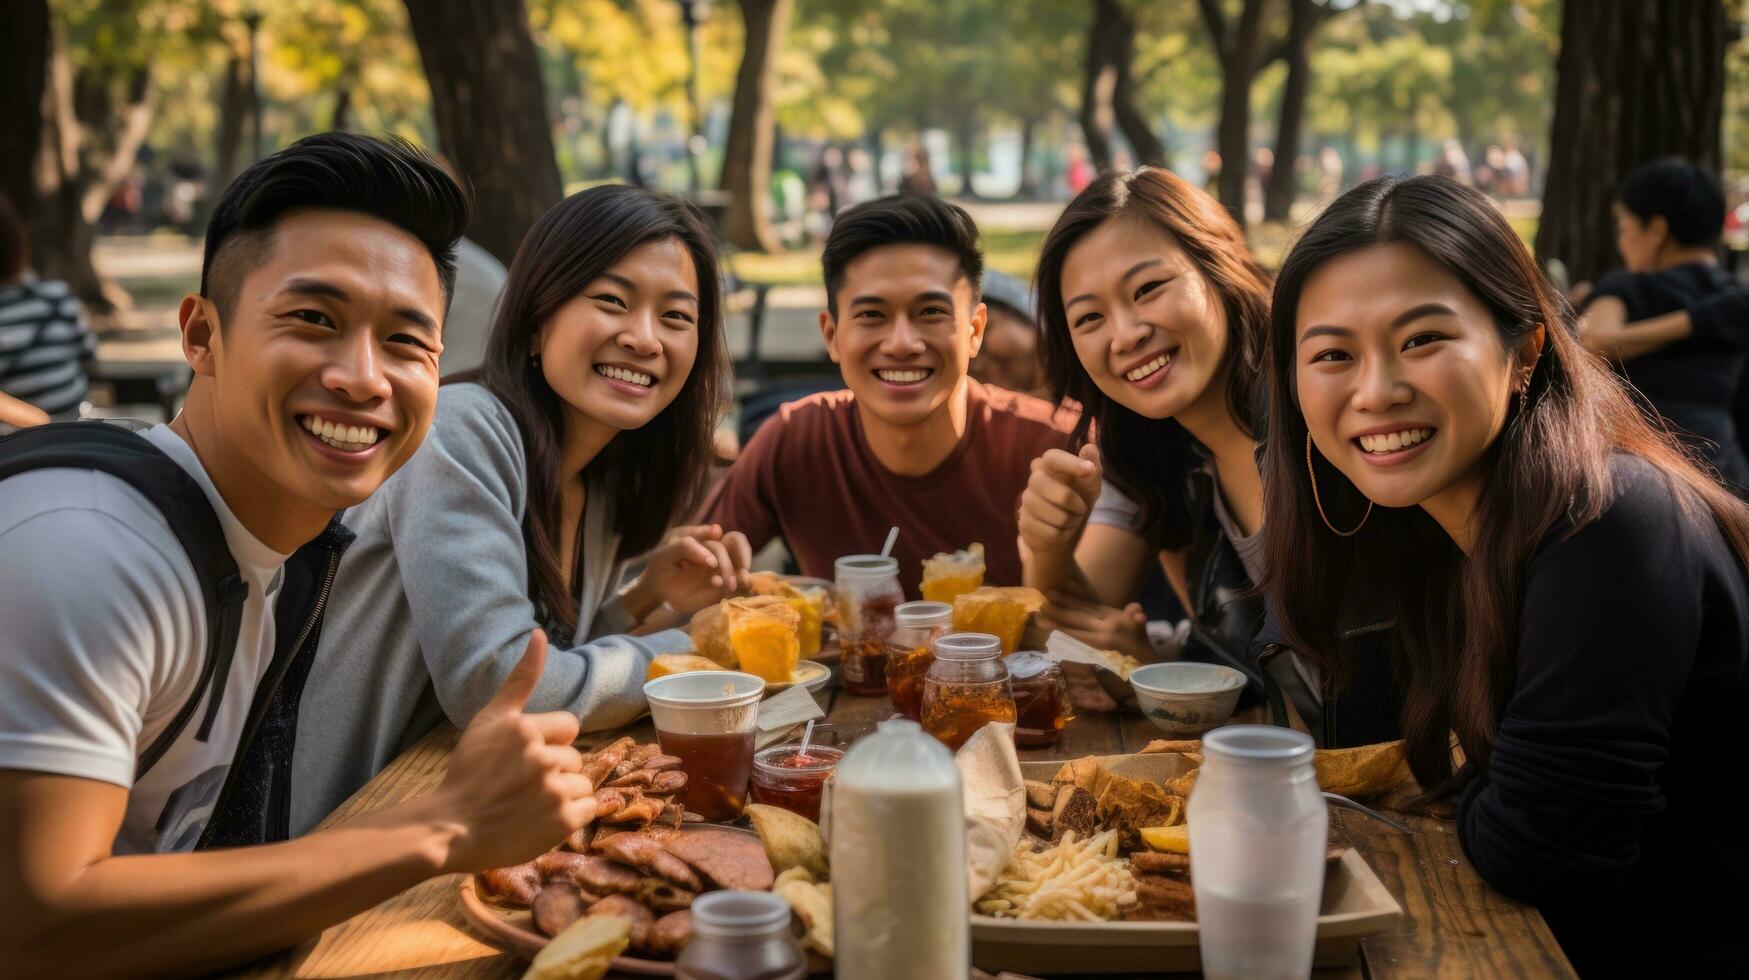 Fun-filled picnic with good company photo